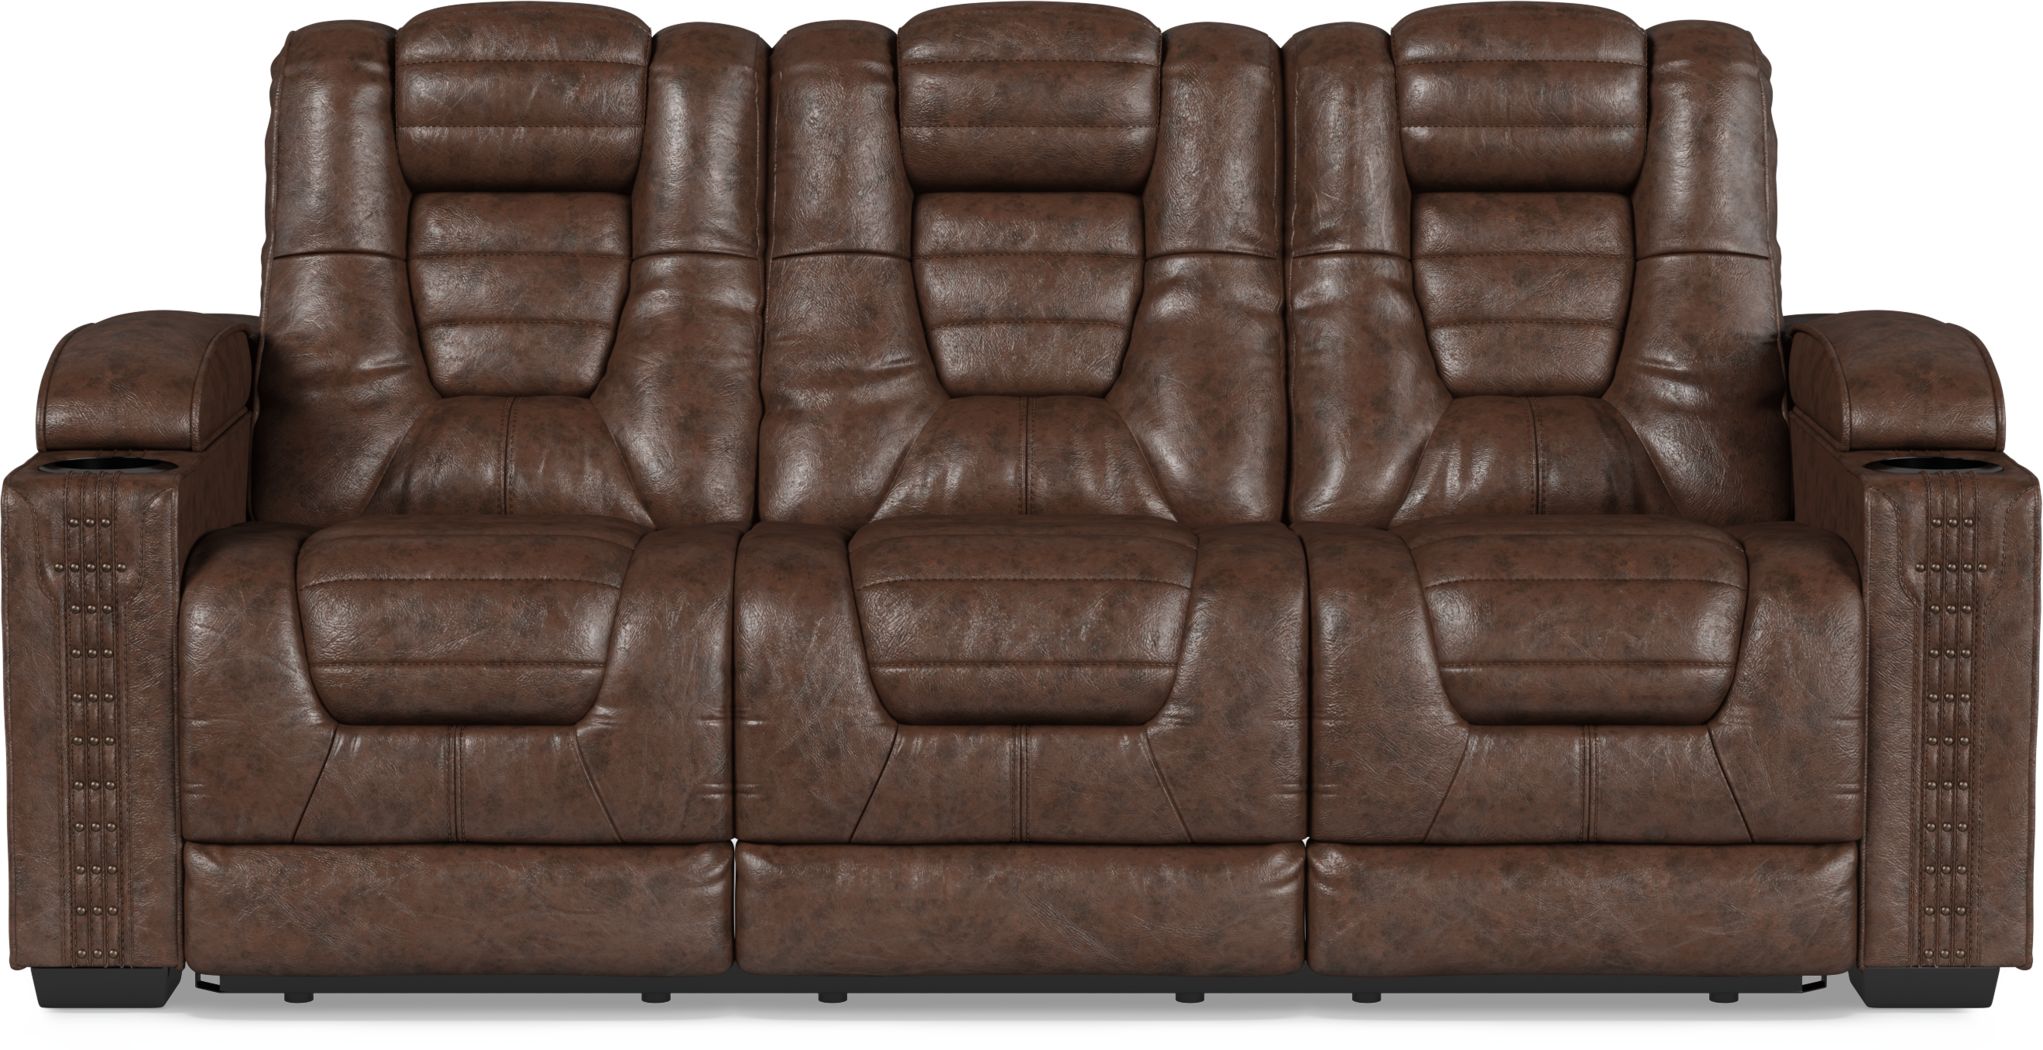 Reclining Small Sofas Couches For, Small Scale Leather Reclining Sofa